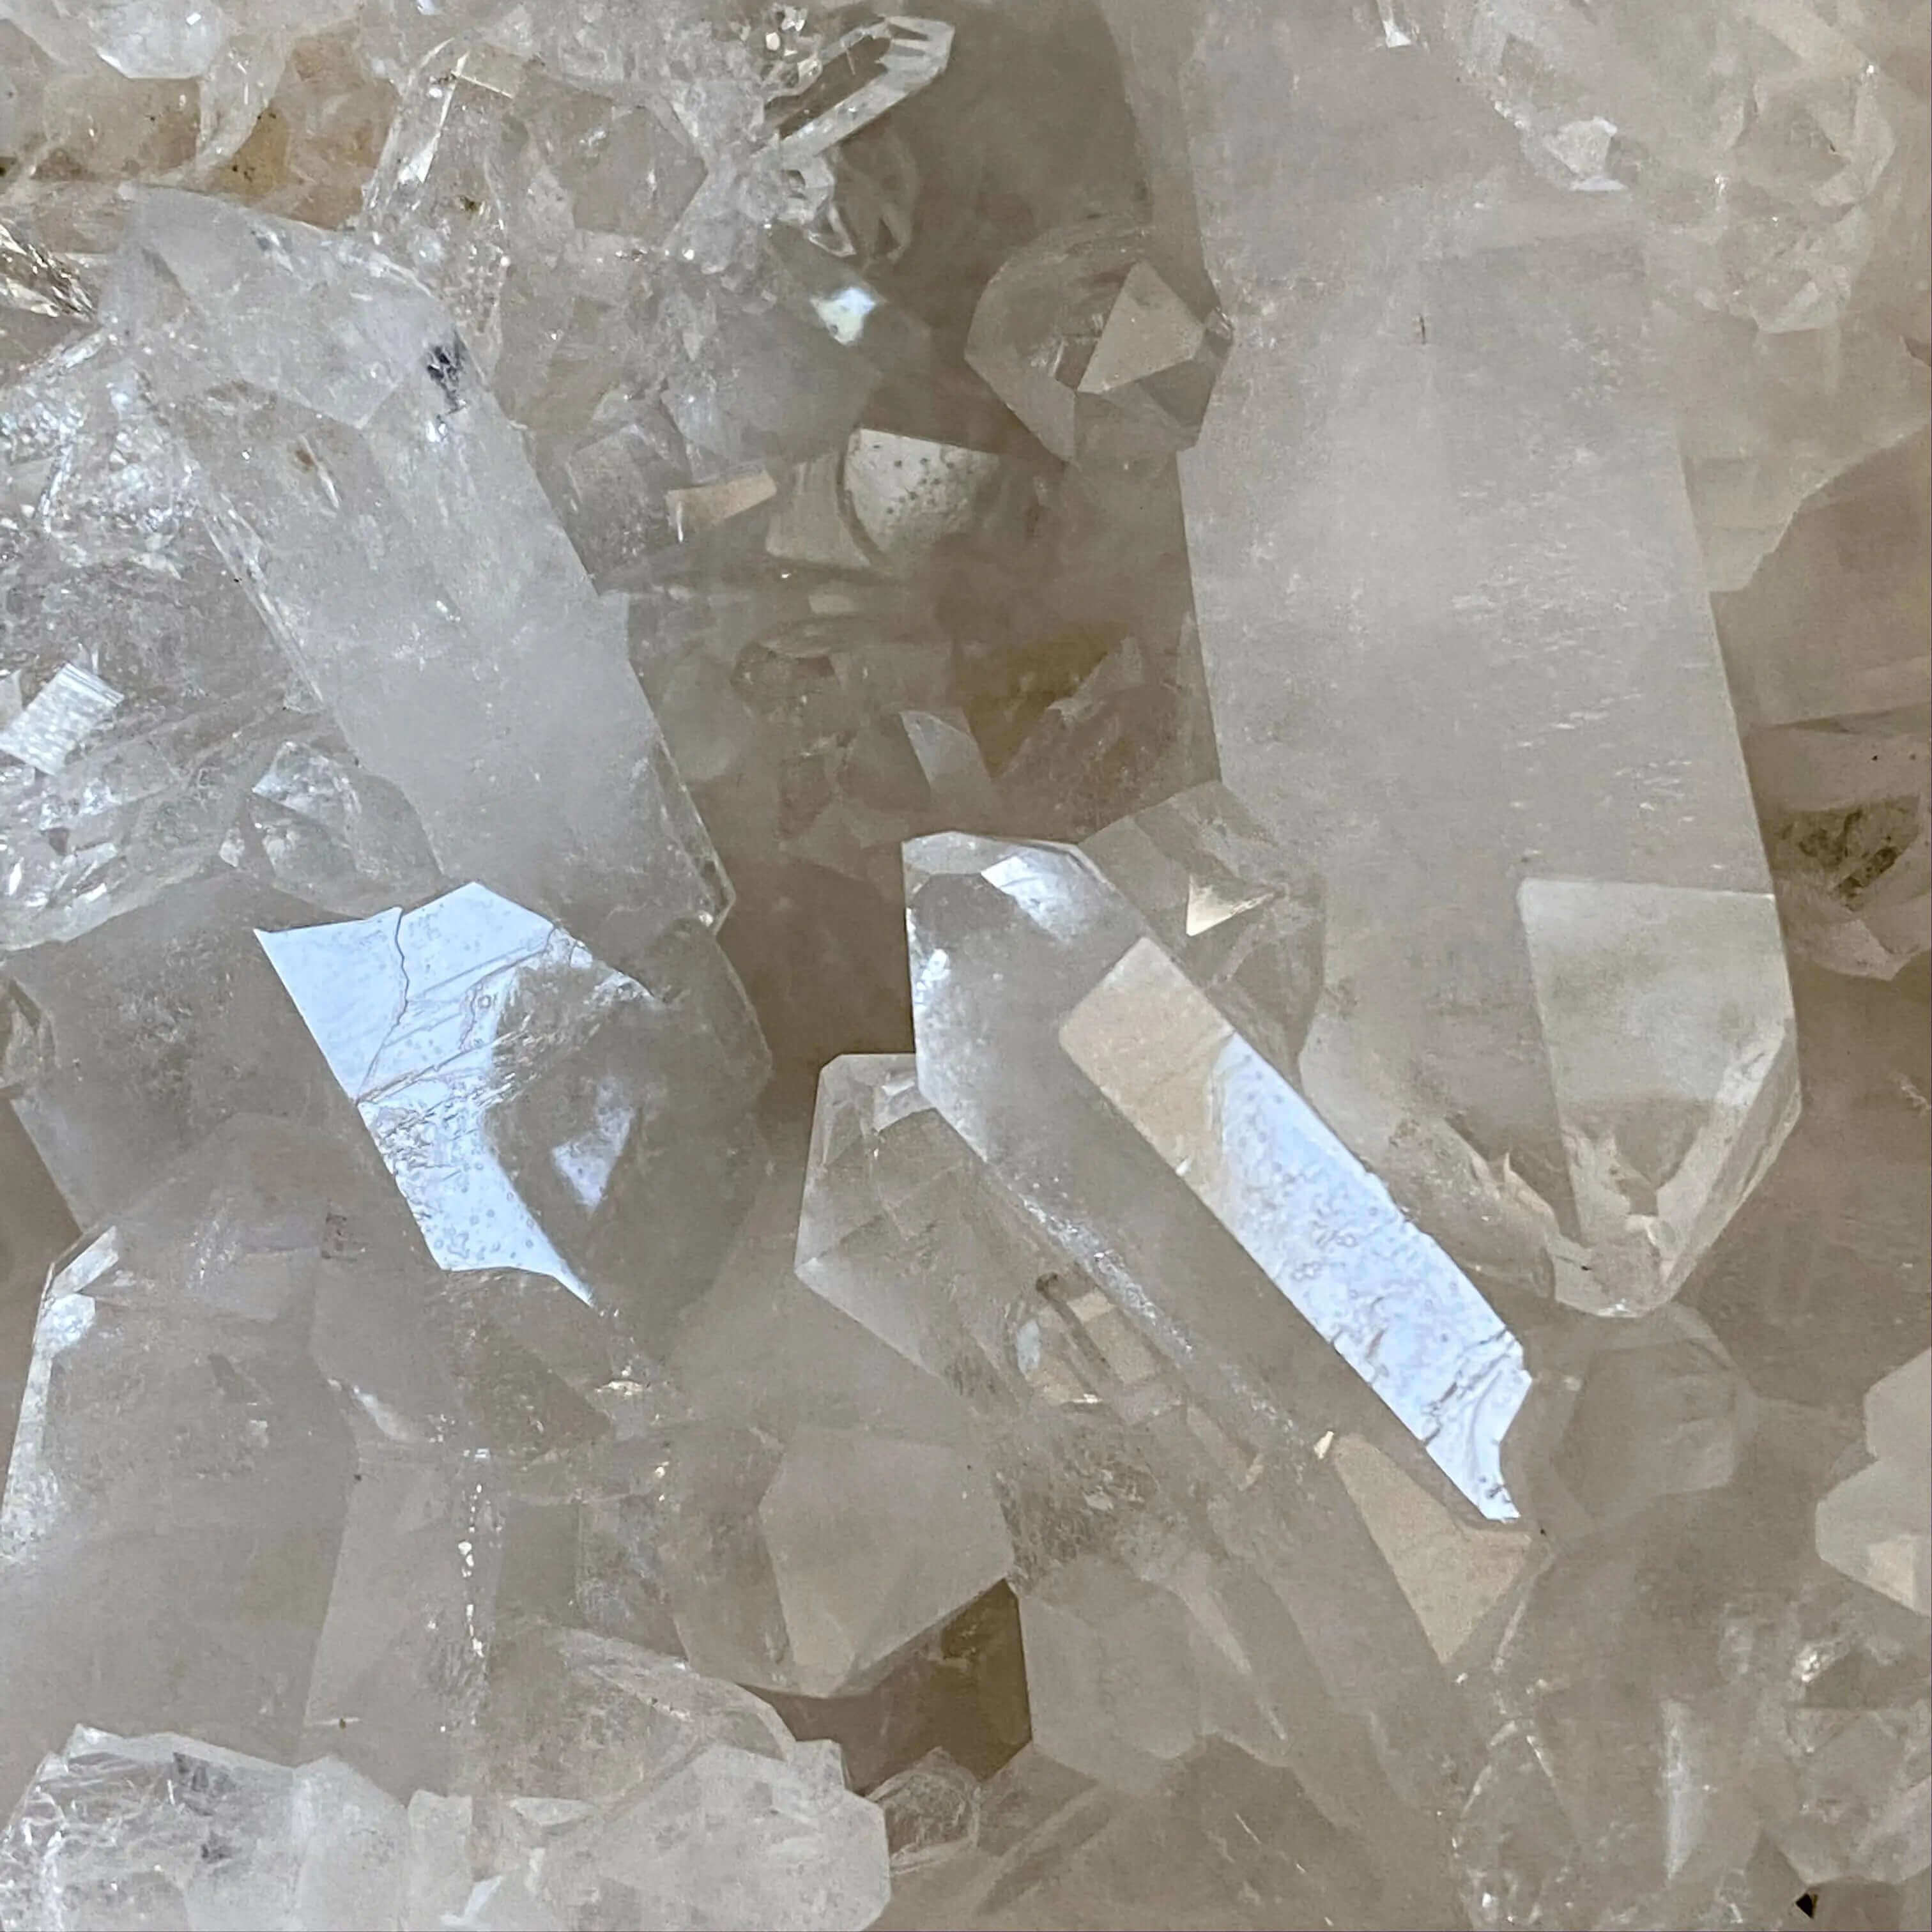 CLEARS THE MIND + AMPLIFIES INTENTIONS:: Brazilian Quartz Cluster Display